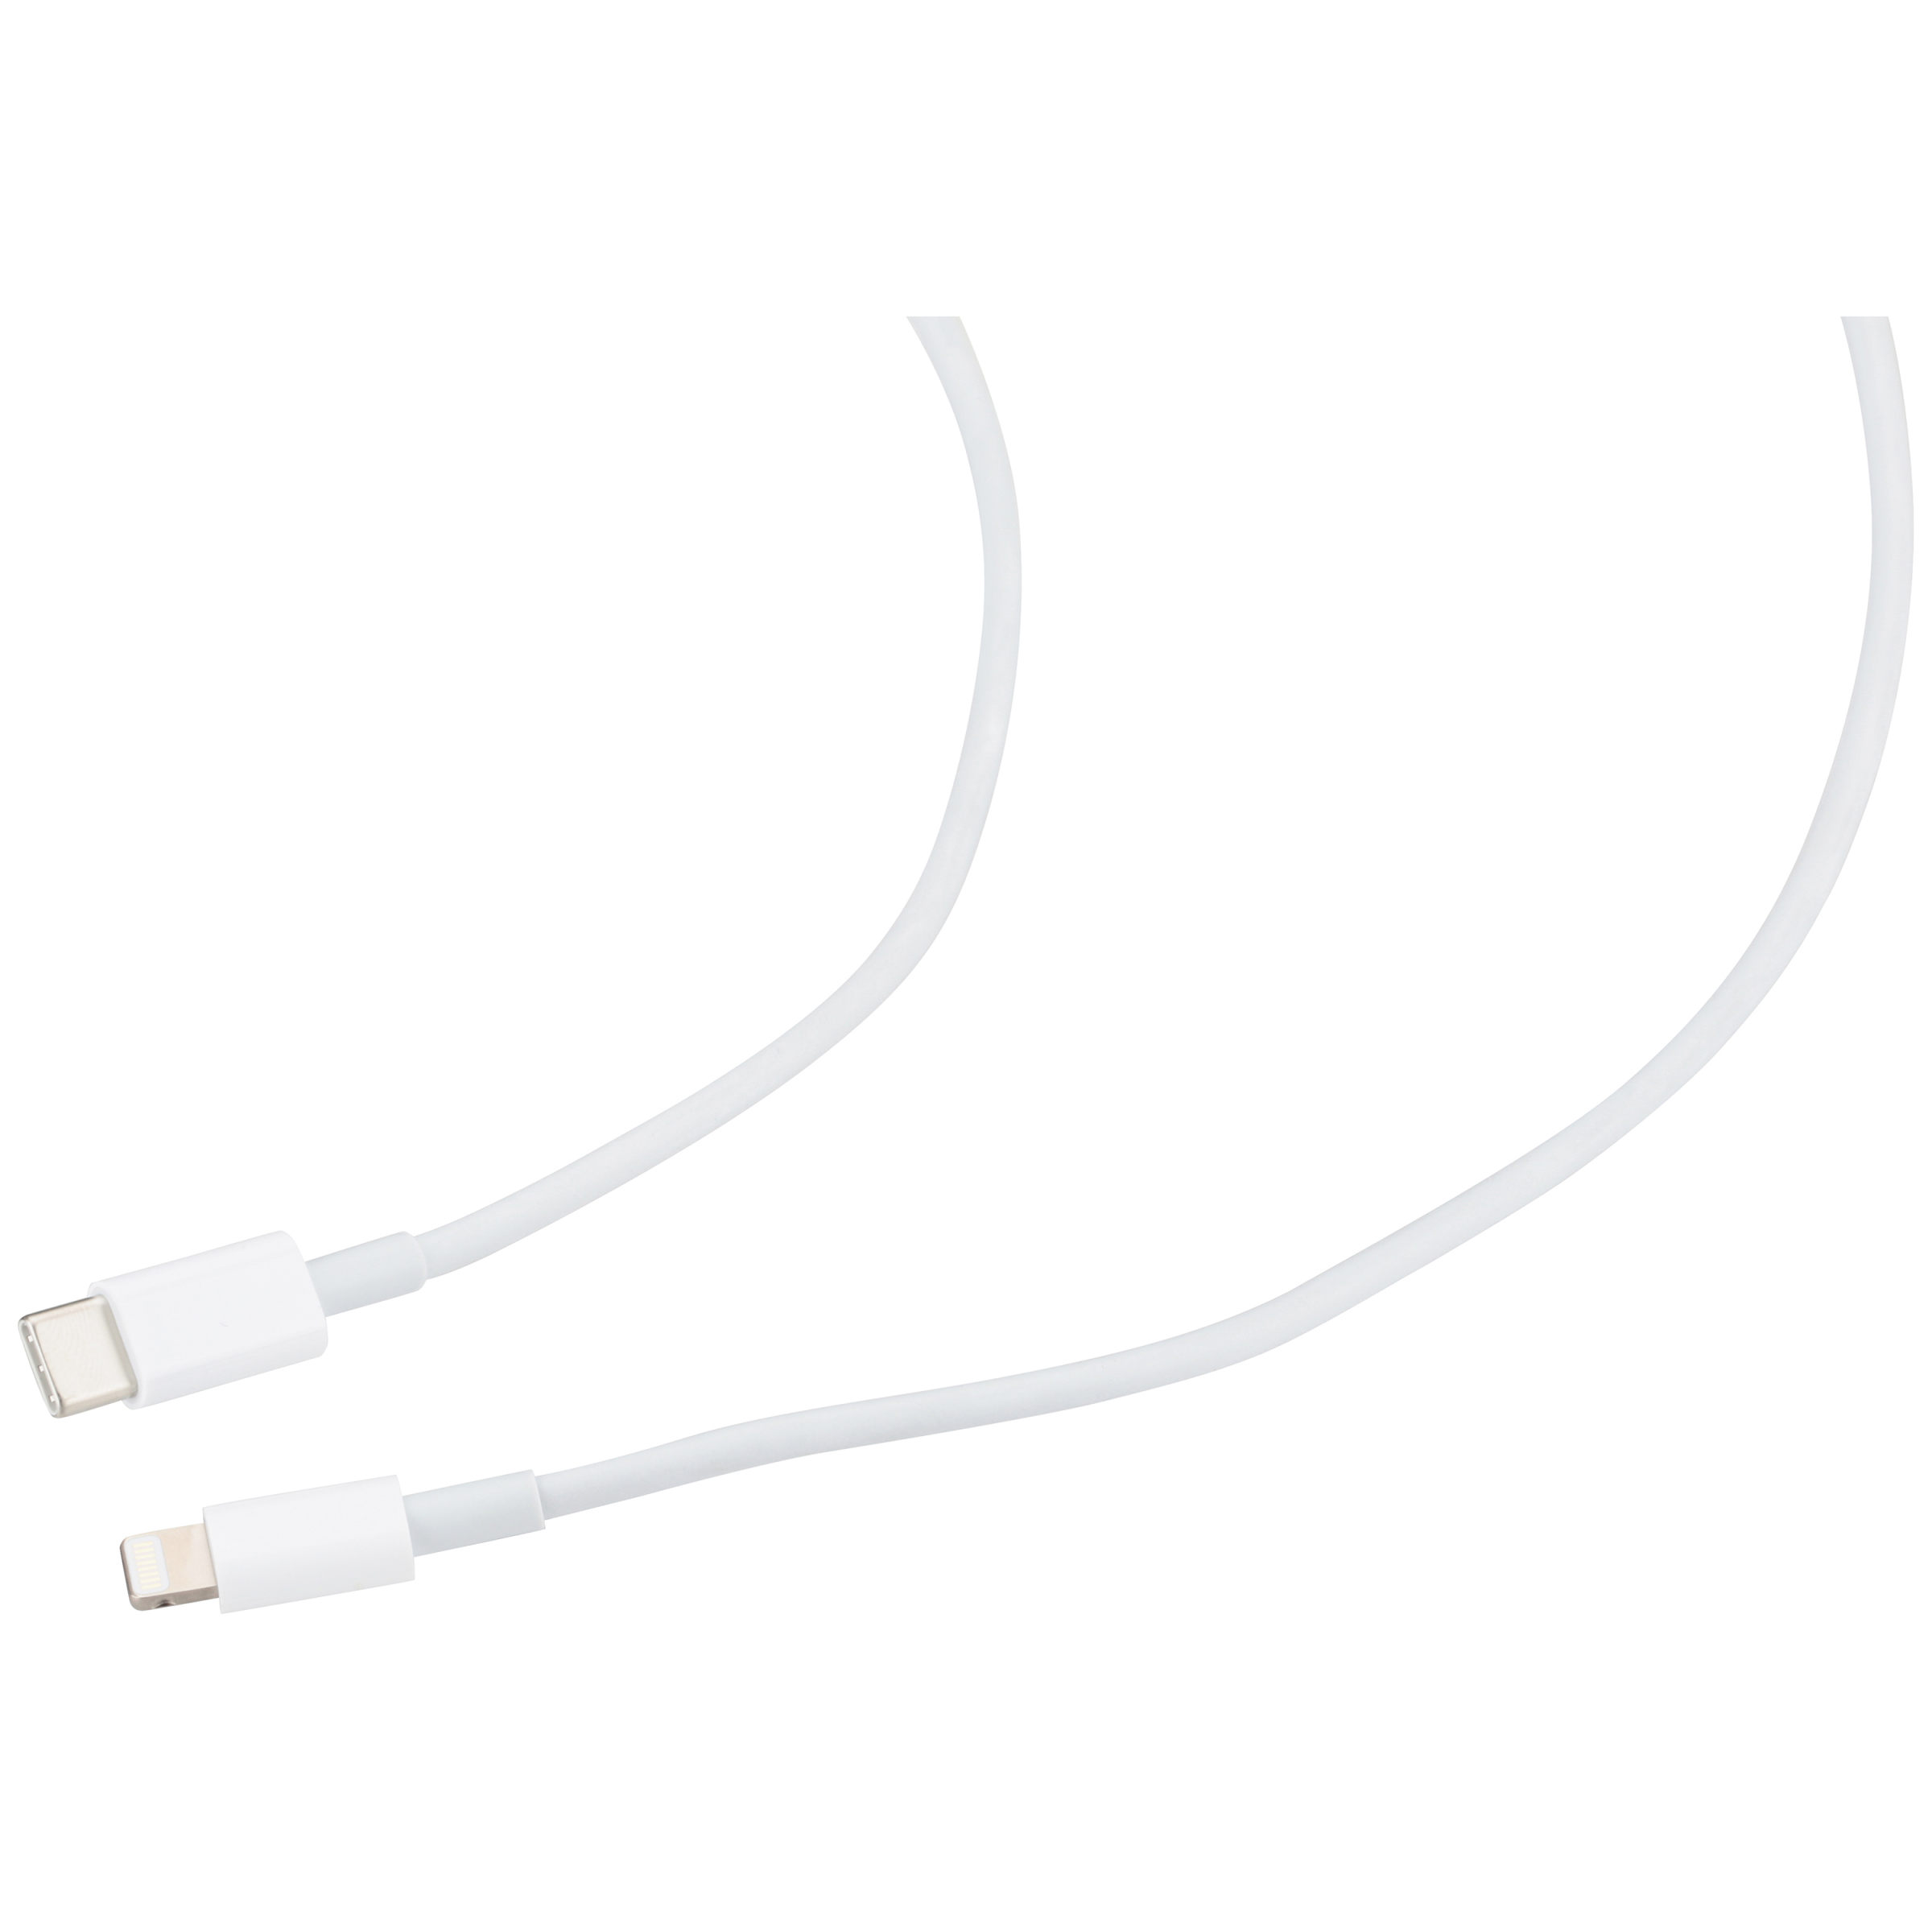 Apple USB-C to Lightning Cable (2 m) - image 3 of 9